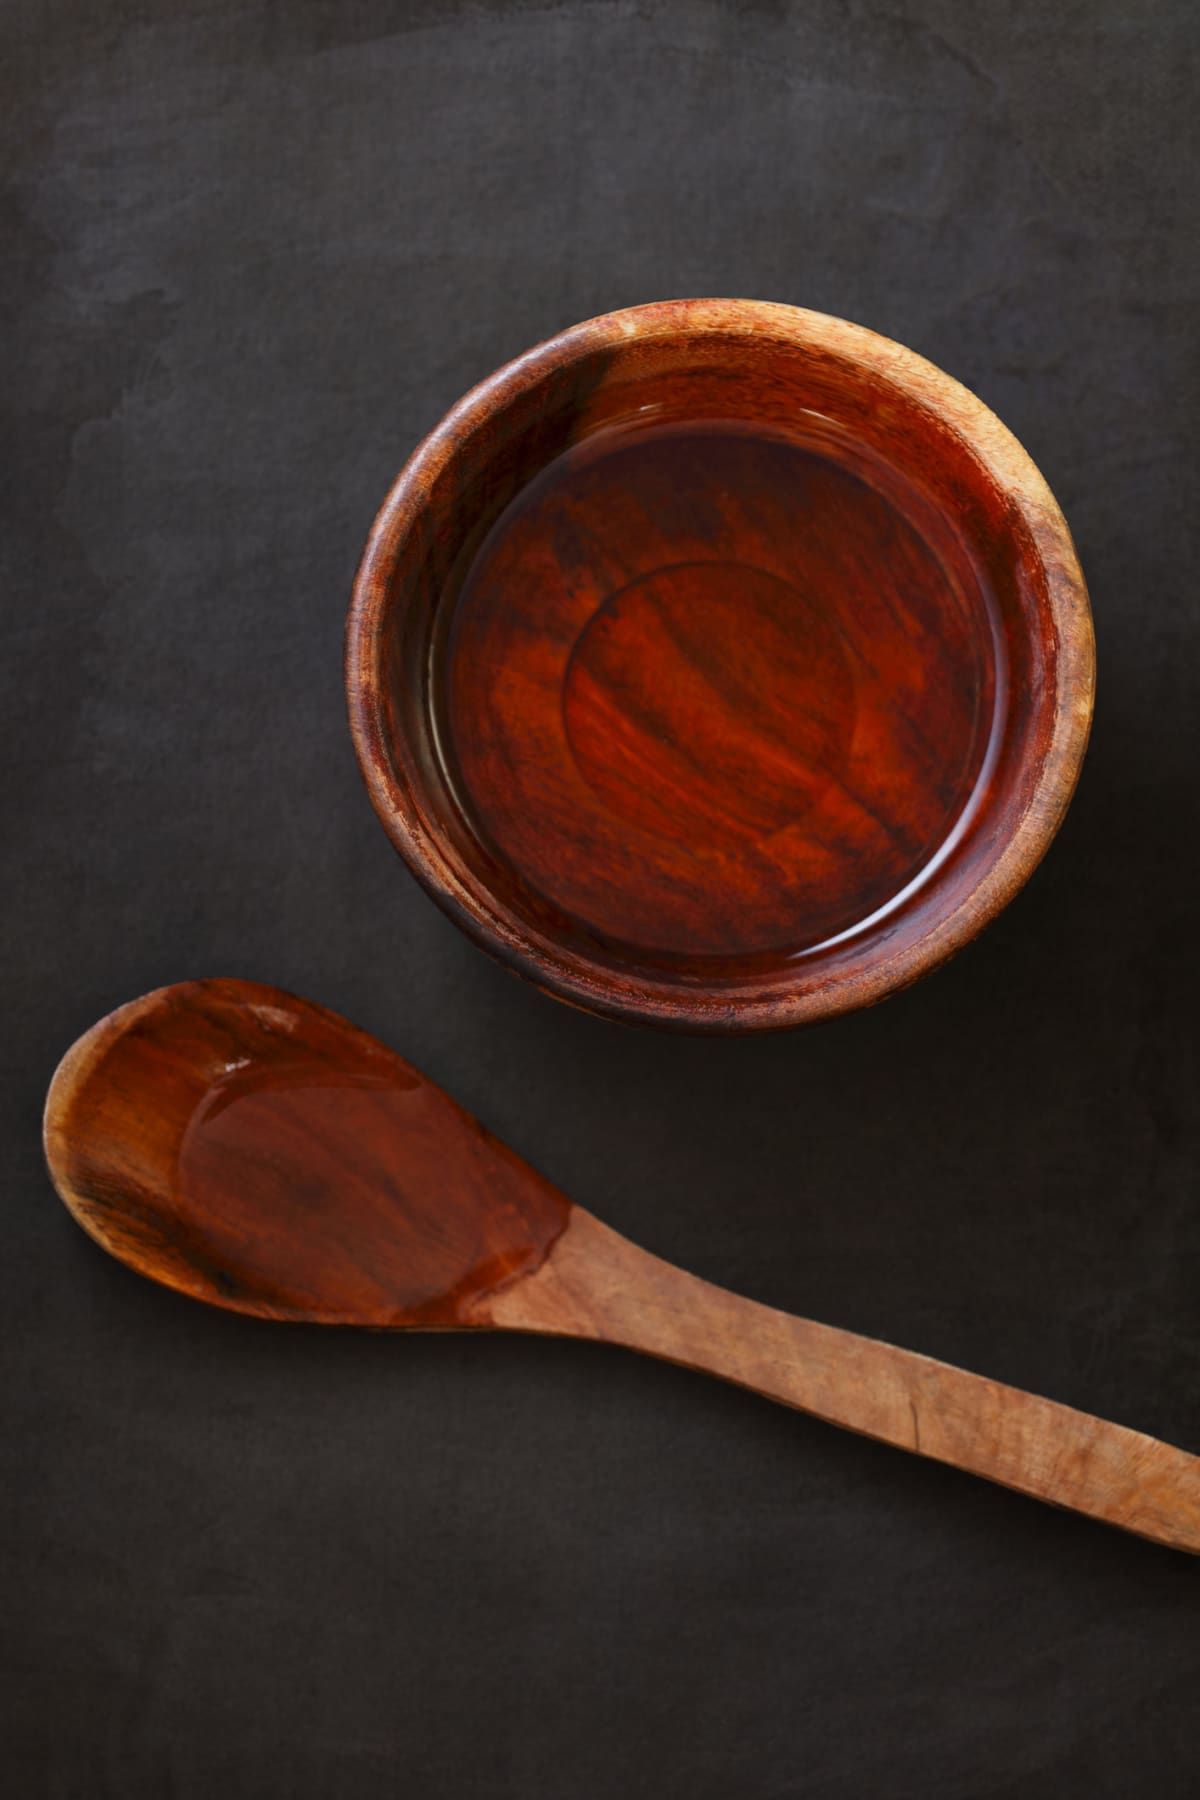 White vinegar in a wooden bowl and spoon